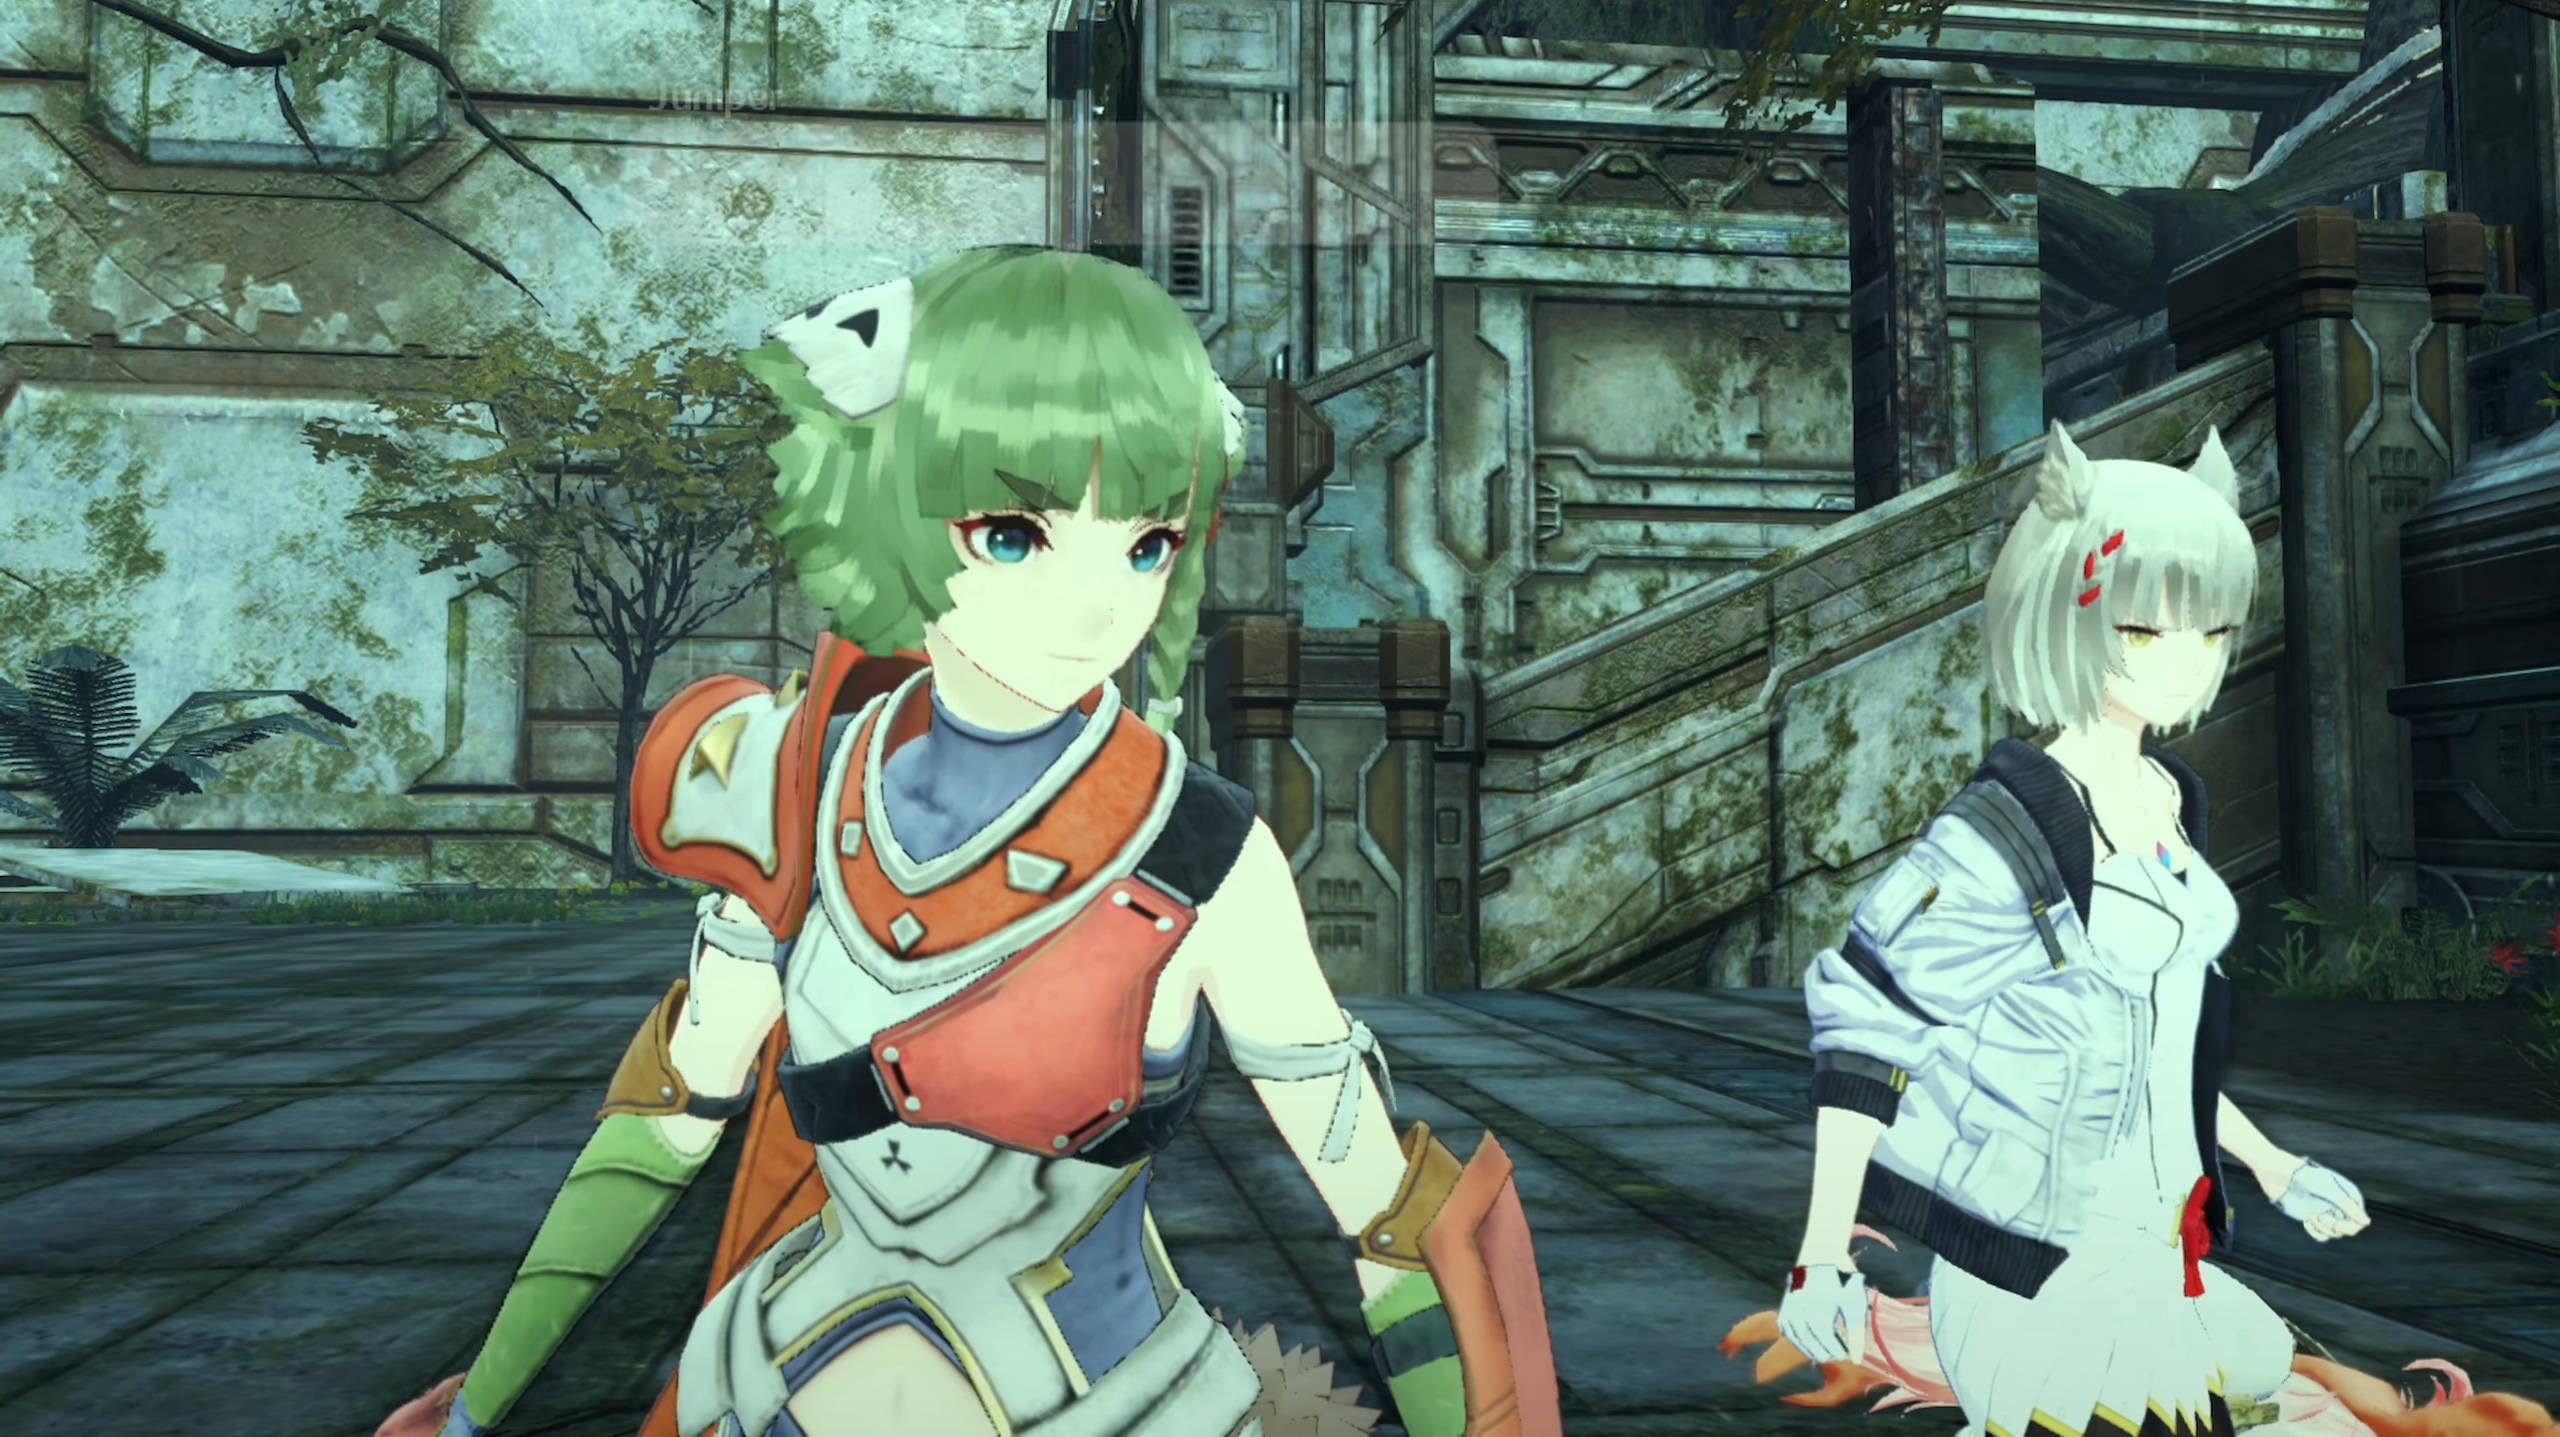 Xenoblade Chronicles 3: How To Unlock All Hero Ascension Quests - KeenGamer